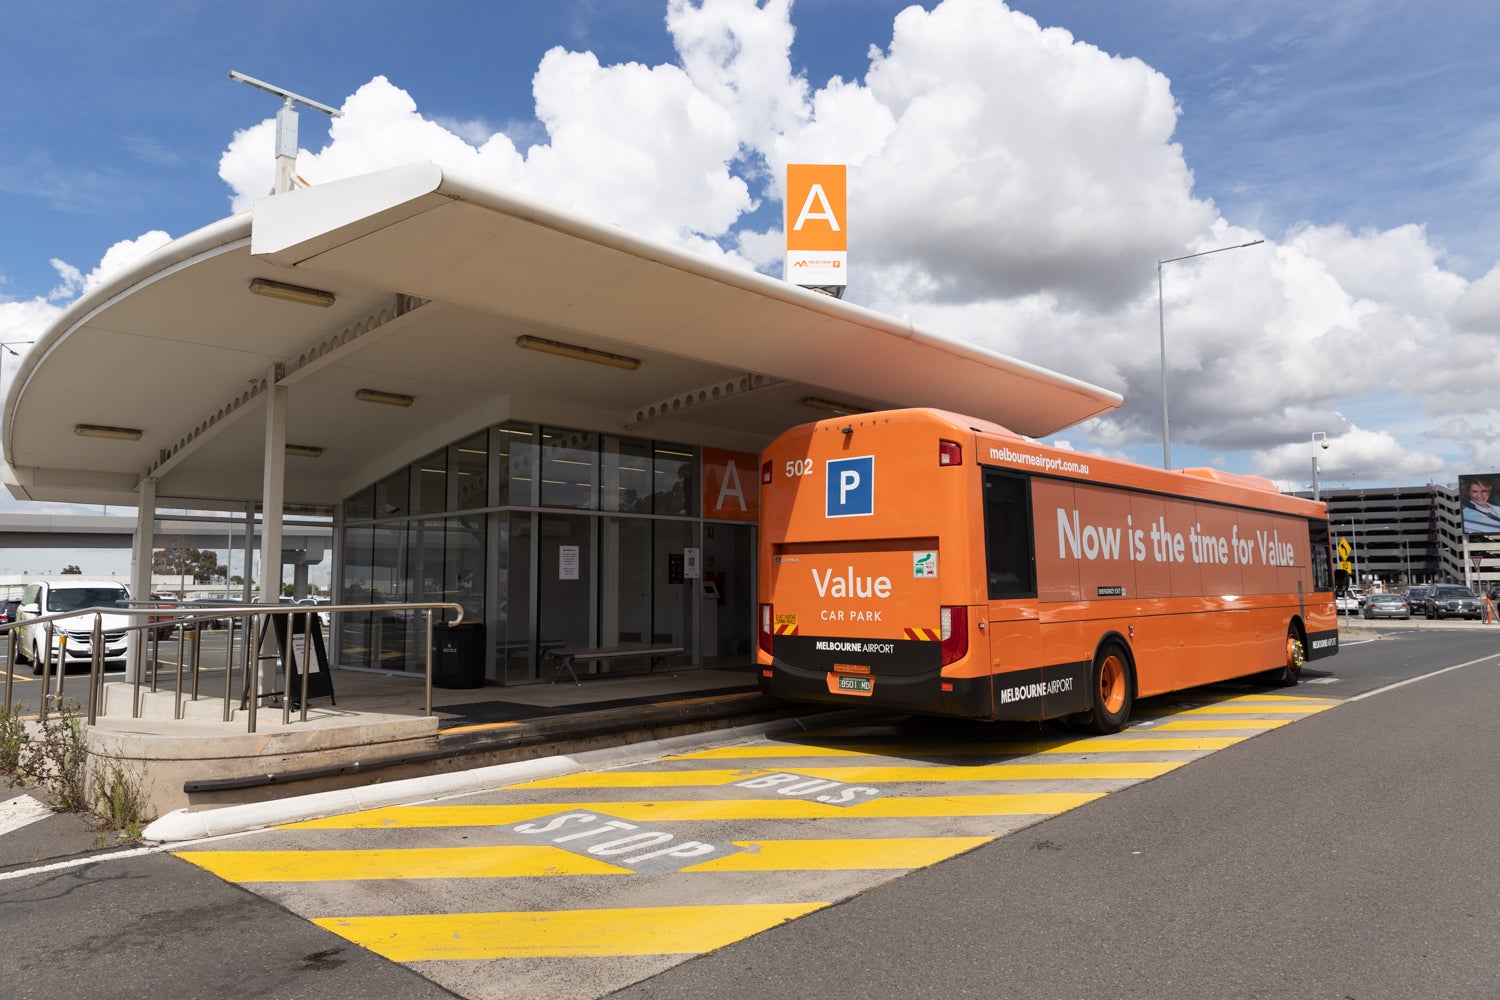 A great low cost option for access to all terminals in minutes. If you're on a budget our Value Car Park is for you.